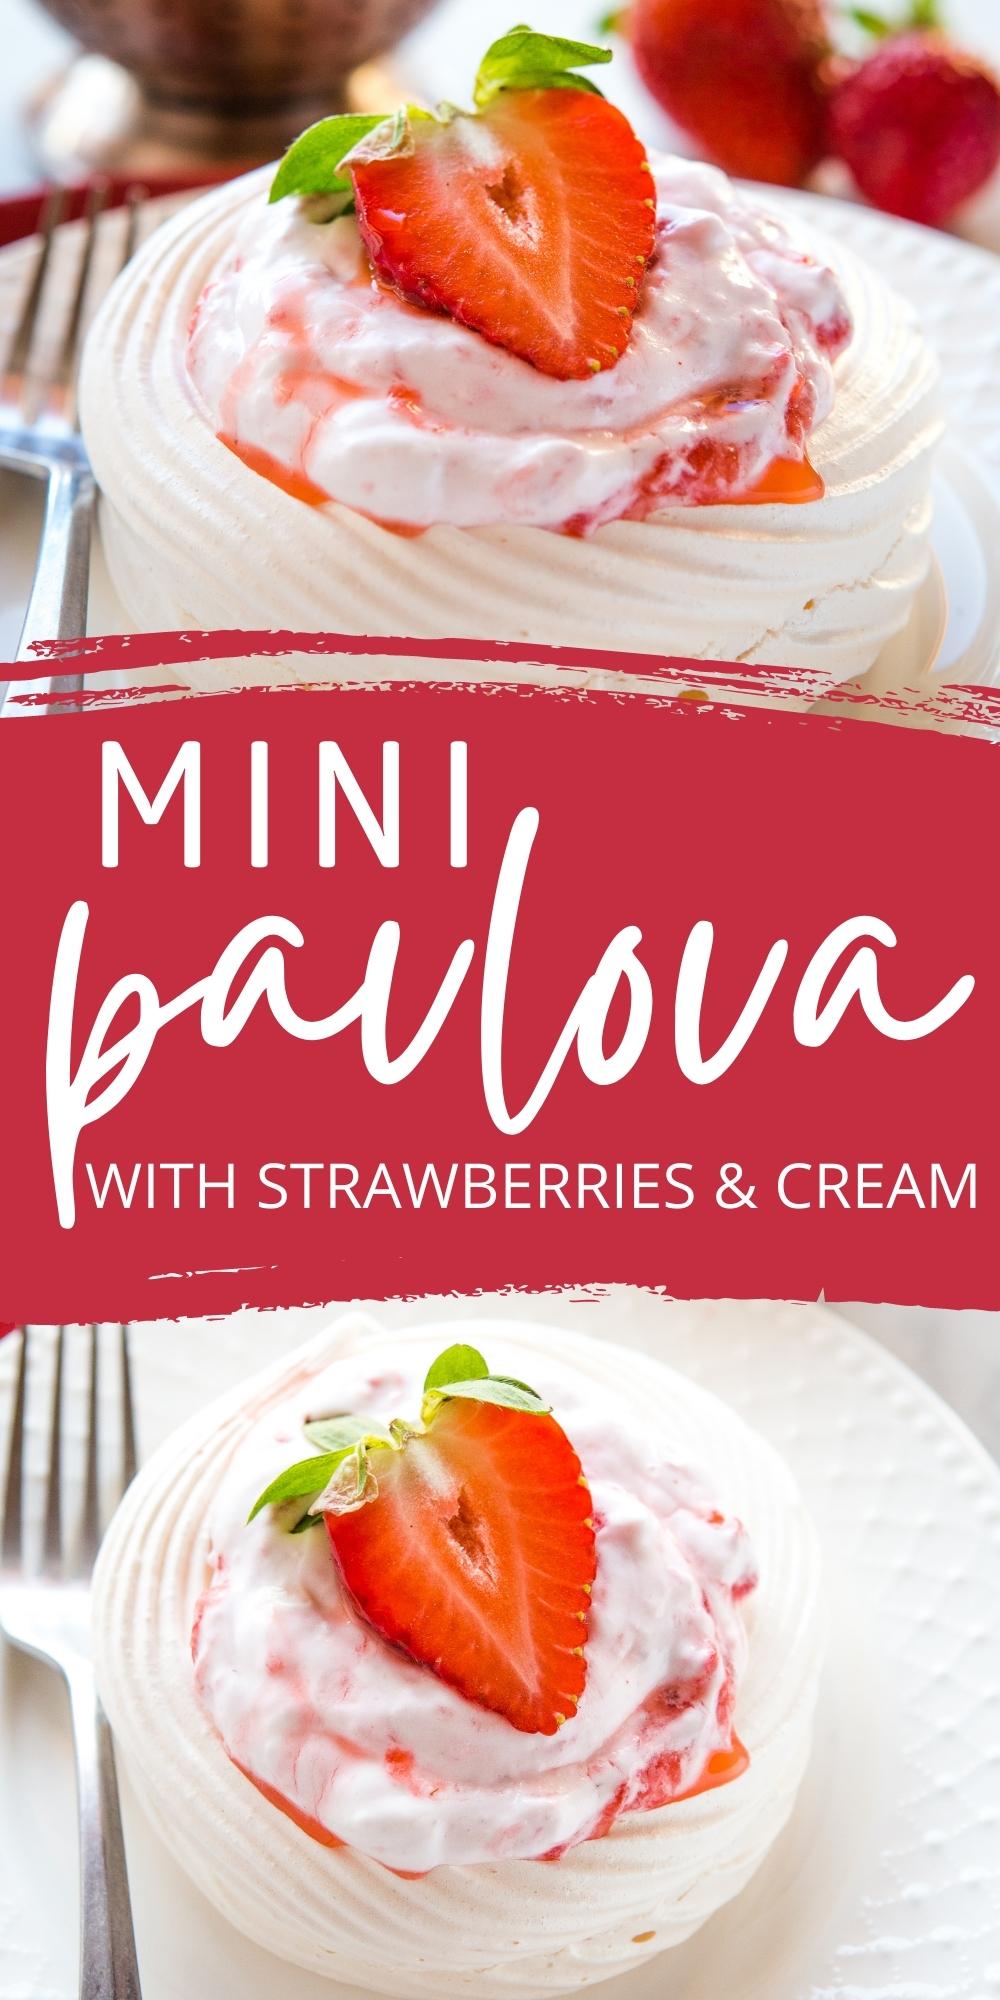 This Mini Pavlova with Strawberries and Cream recipe is the perfect light-tasting summer dessert that's gluten-free and packed with sweet cream & fresh strawberries!  Recipe from thebusybaker.ca! #minipavlova #strawberry #dessert #glutenfree #easydessert #summer #strawberry via @busybakerblog